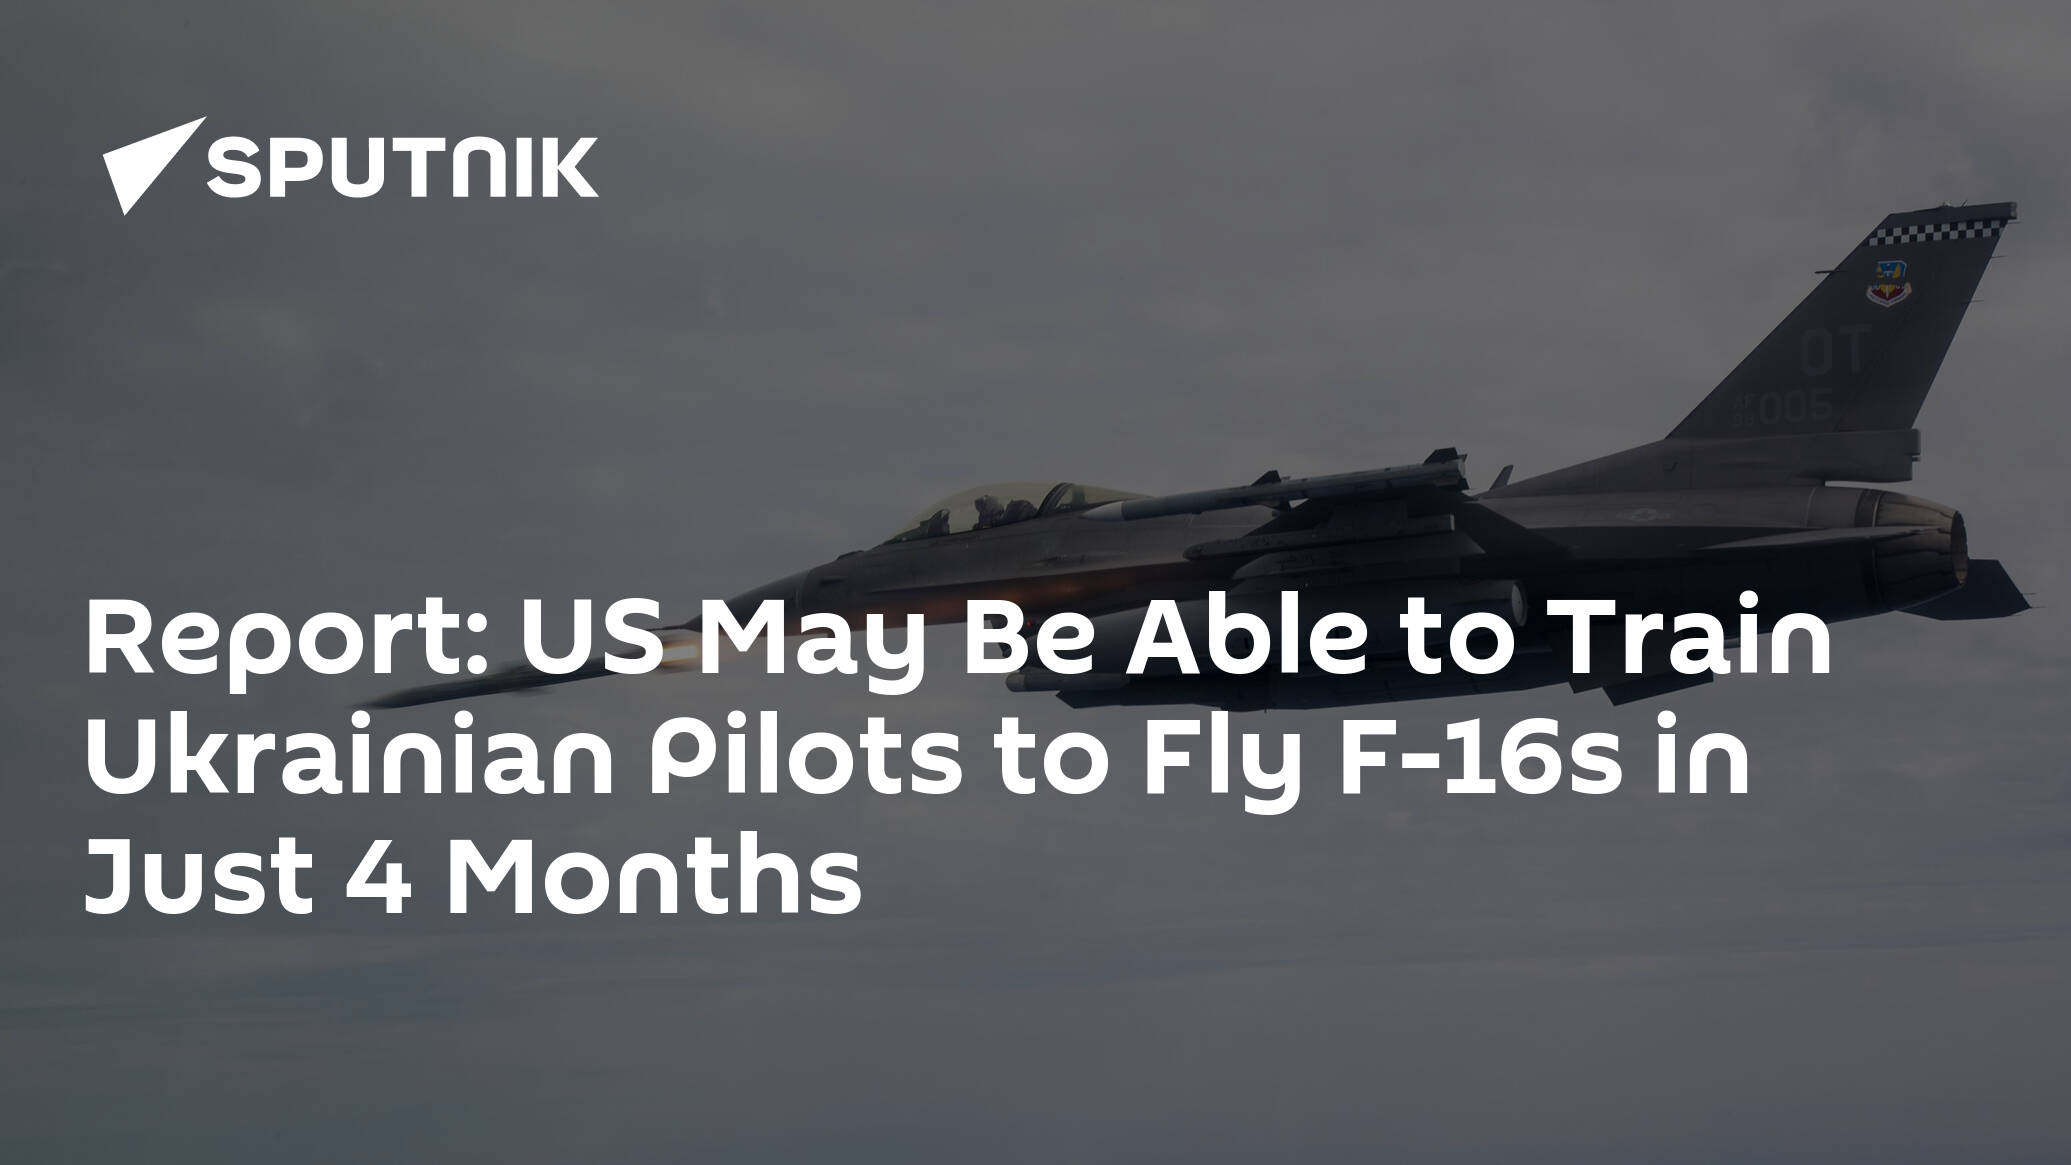 Report: US May Be Able to Train Ukrainian Pilots to Fly F-16s in Just 4 Months